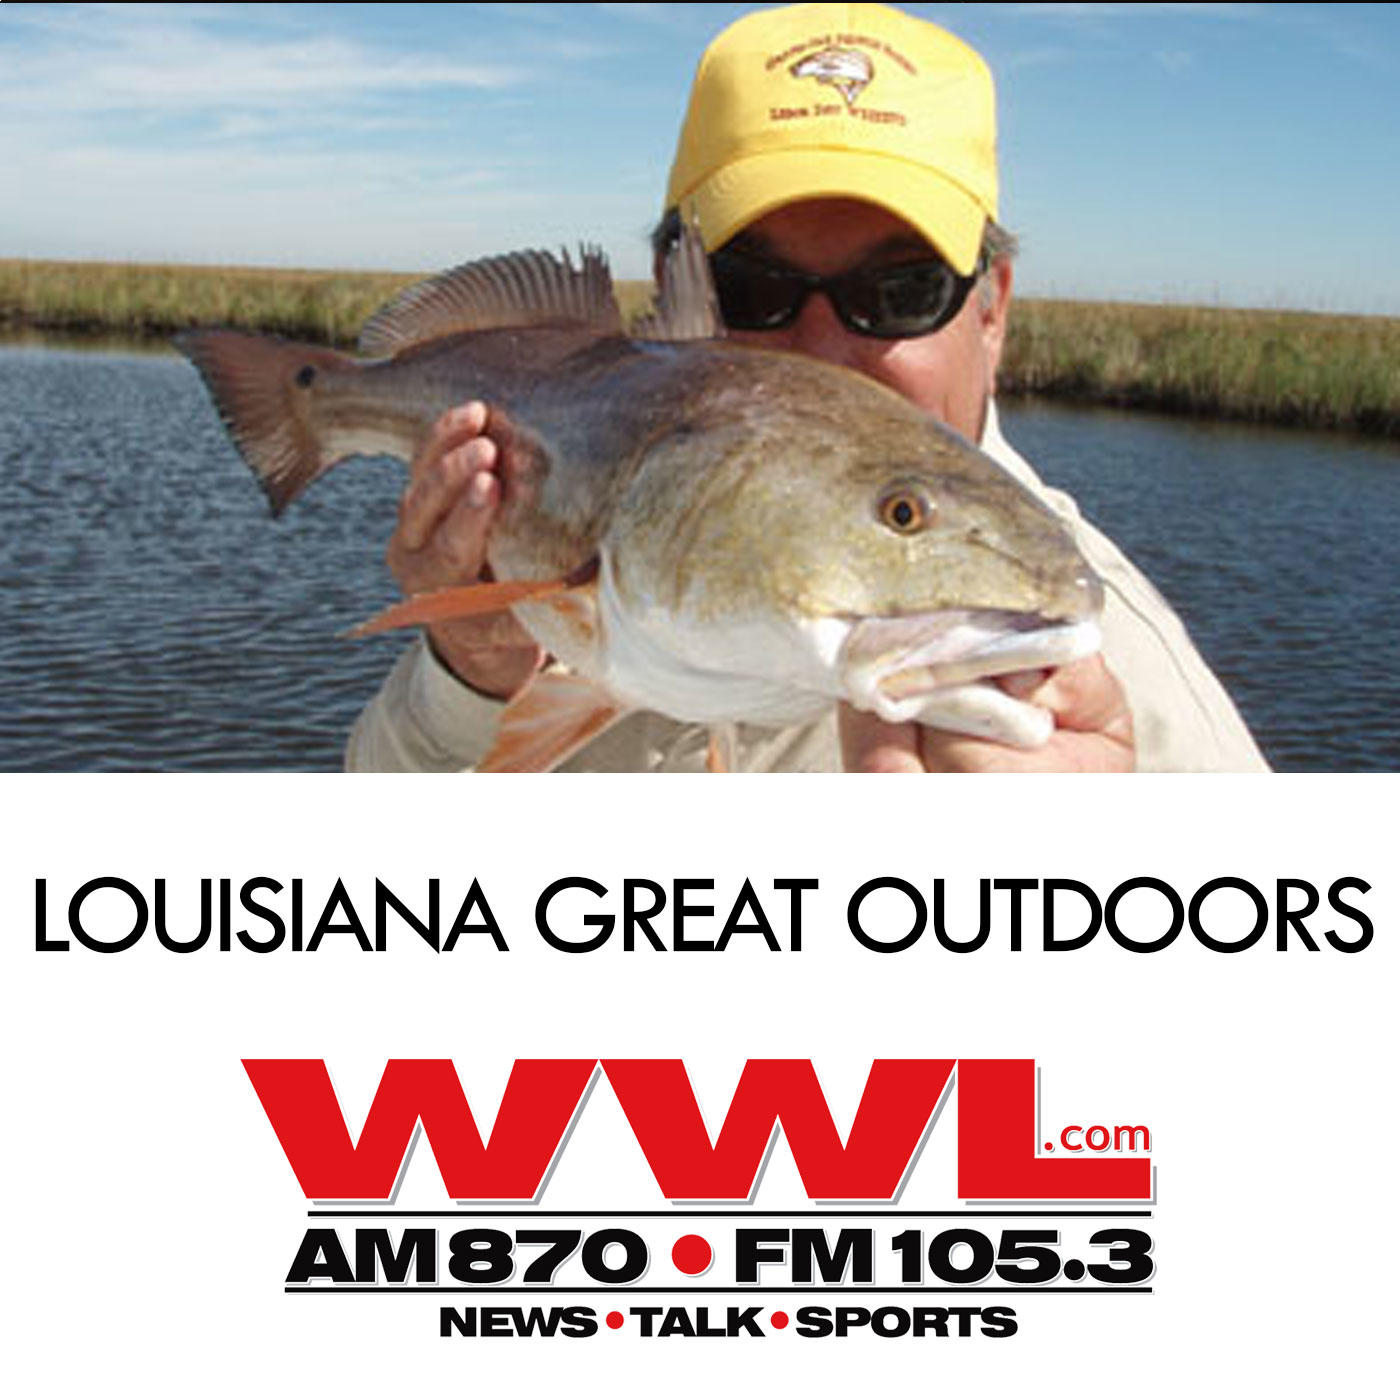 Are we happy with the new Redfish regulations soon to be in place?